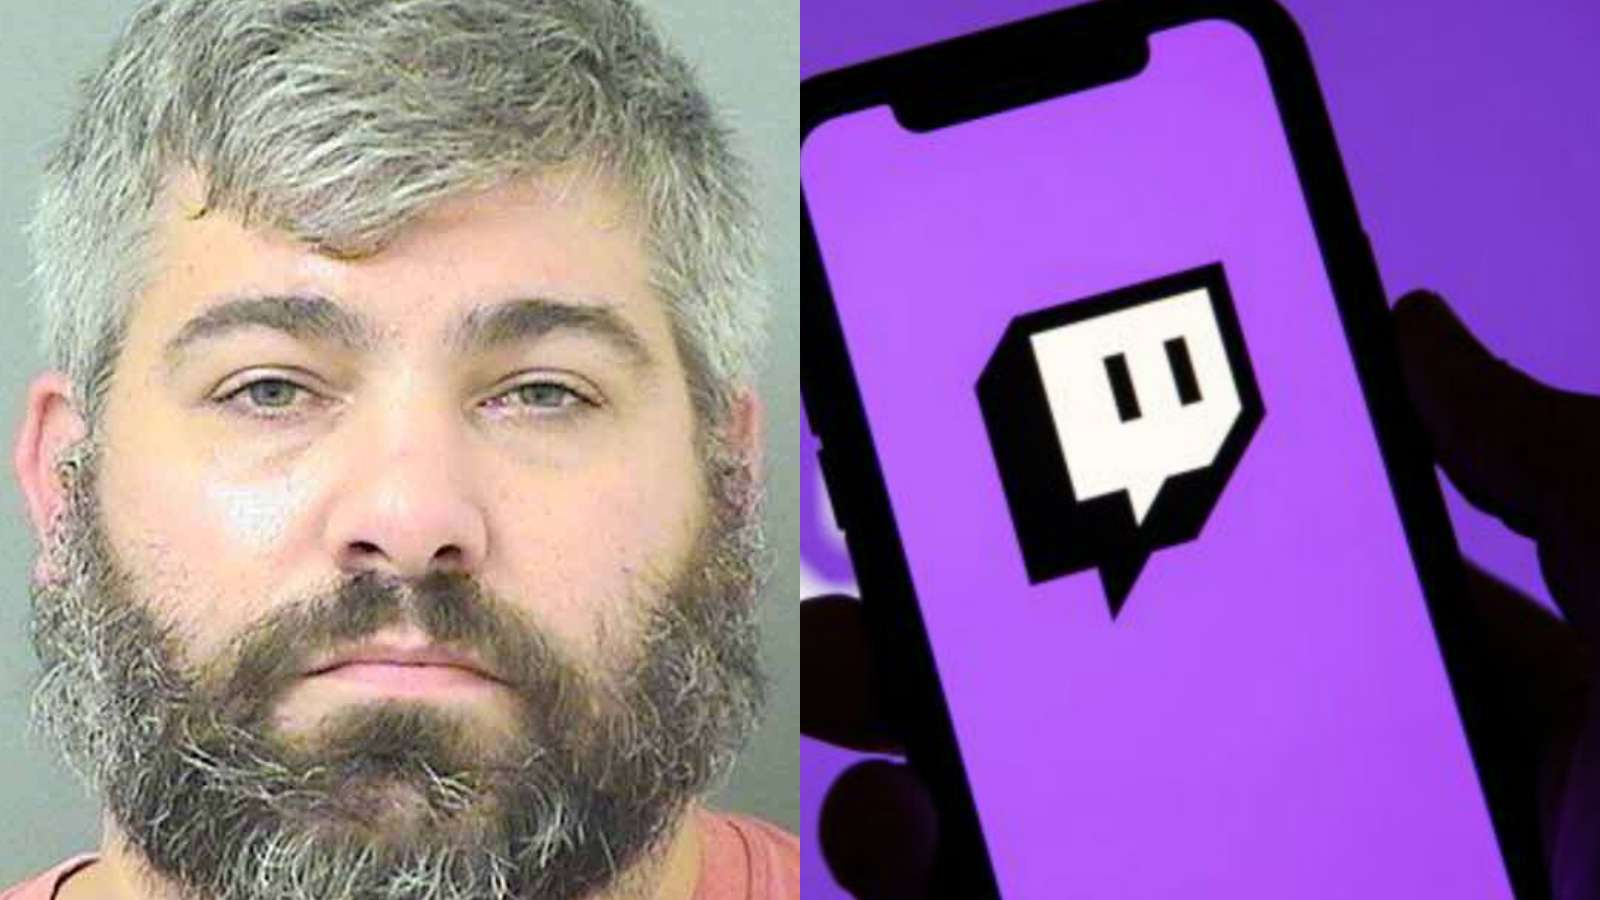 florida man arrested for threatening to kill people on twitch